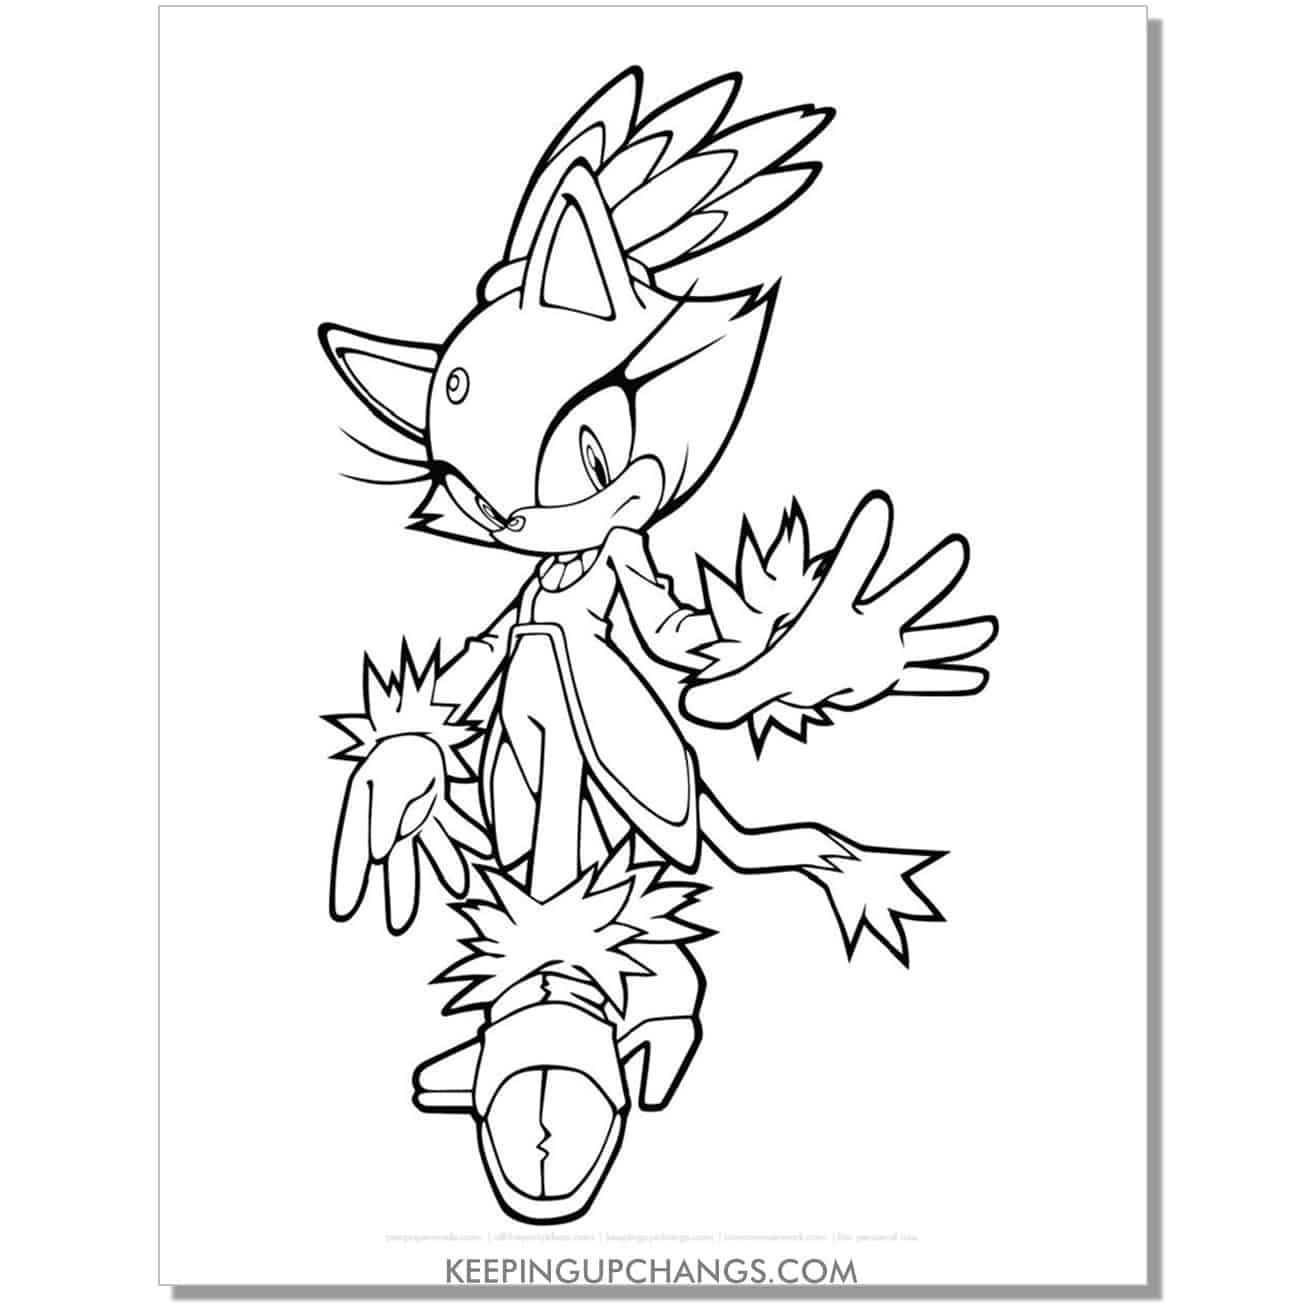 blaze cat with palm to side sonic coloring page.